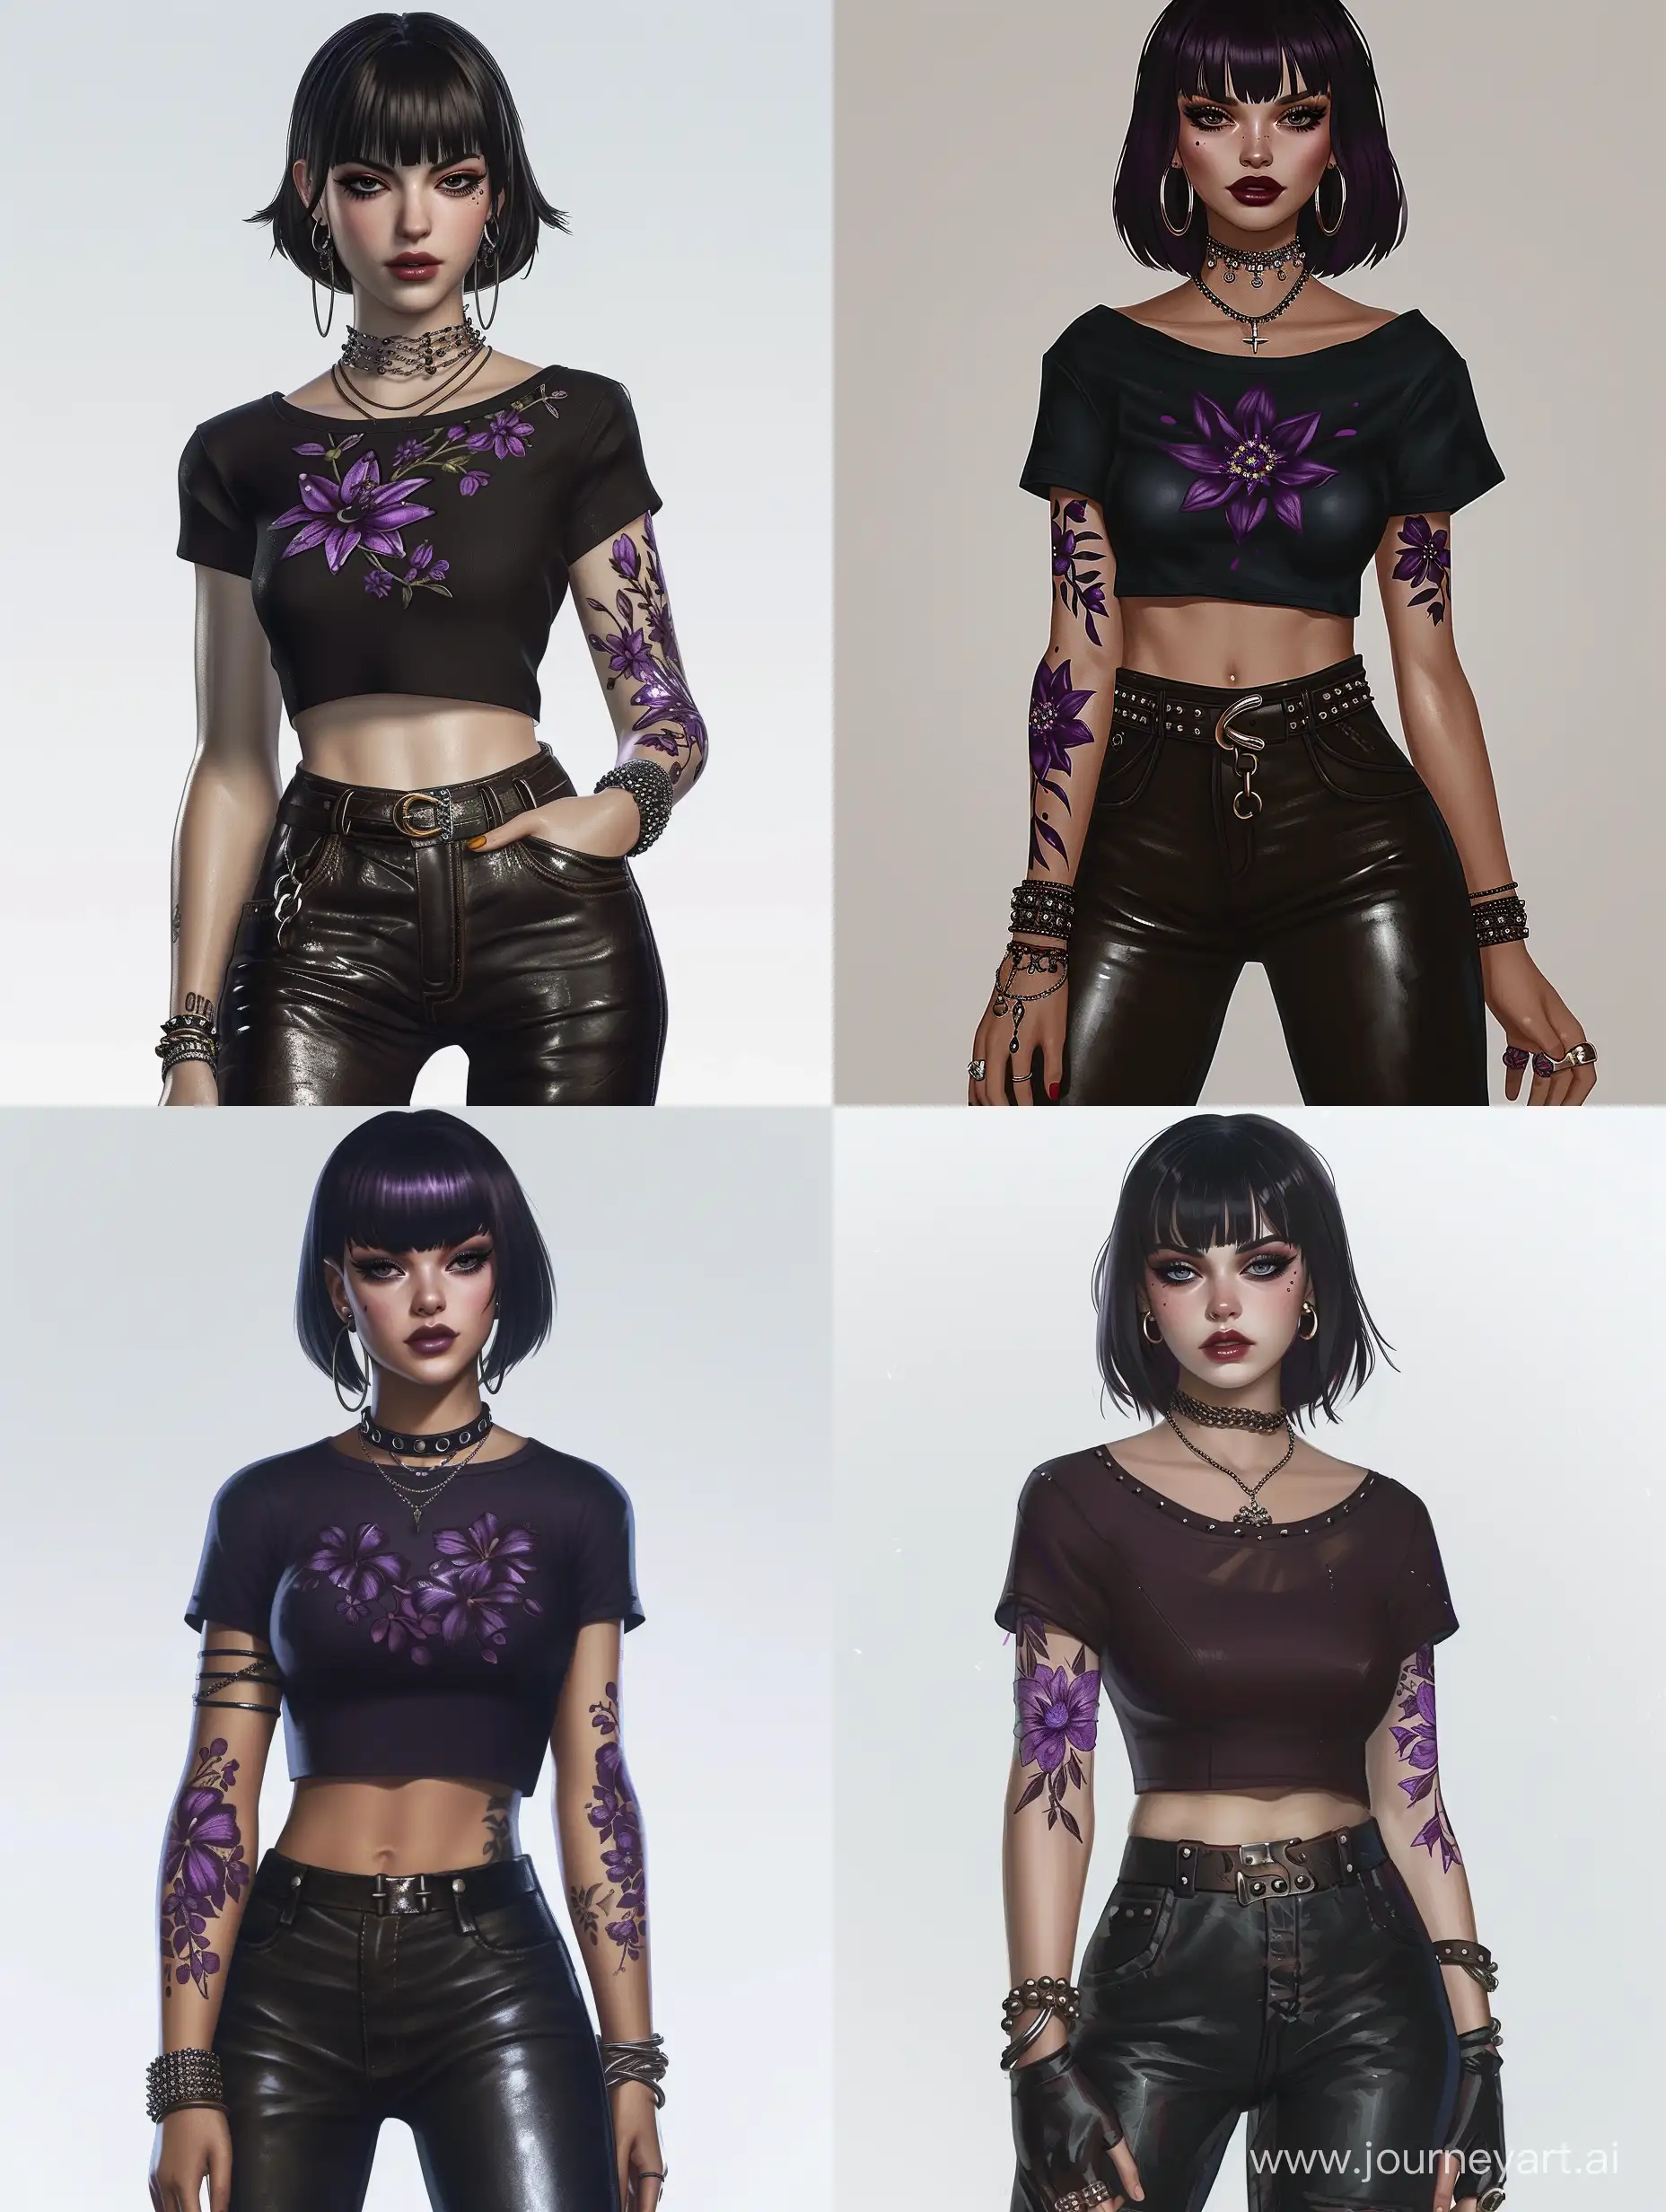 a tall woman with long eyelashes and short black hair with bangs. She wears a dark short-sleeved top and dark leather pants. She also wears a studded necklace, hoop earrings and has purple flower tattoos on her arms.